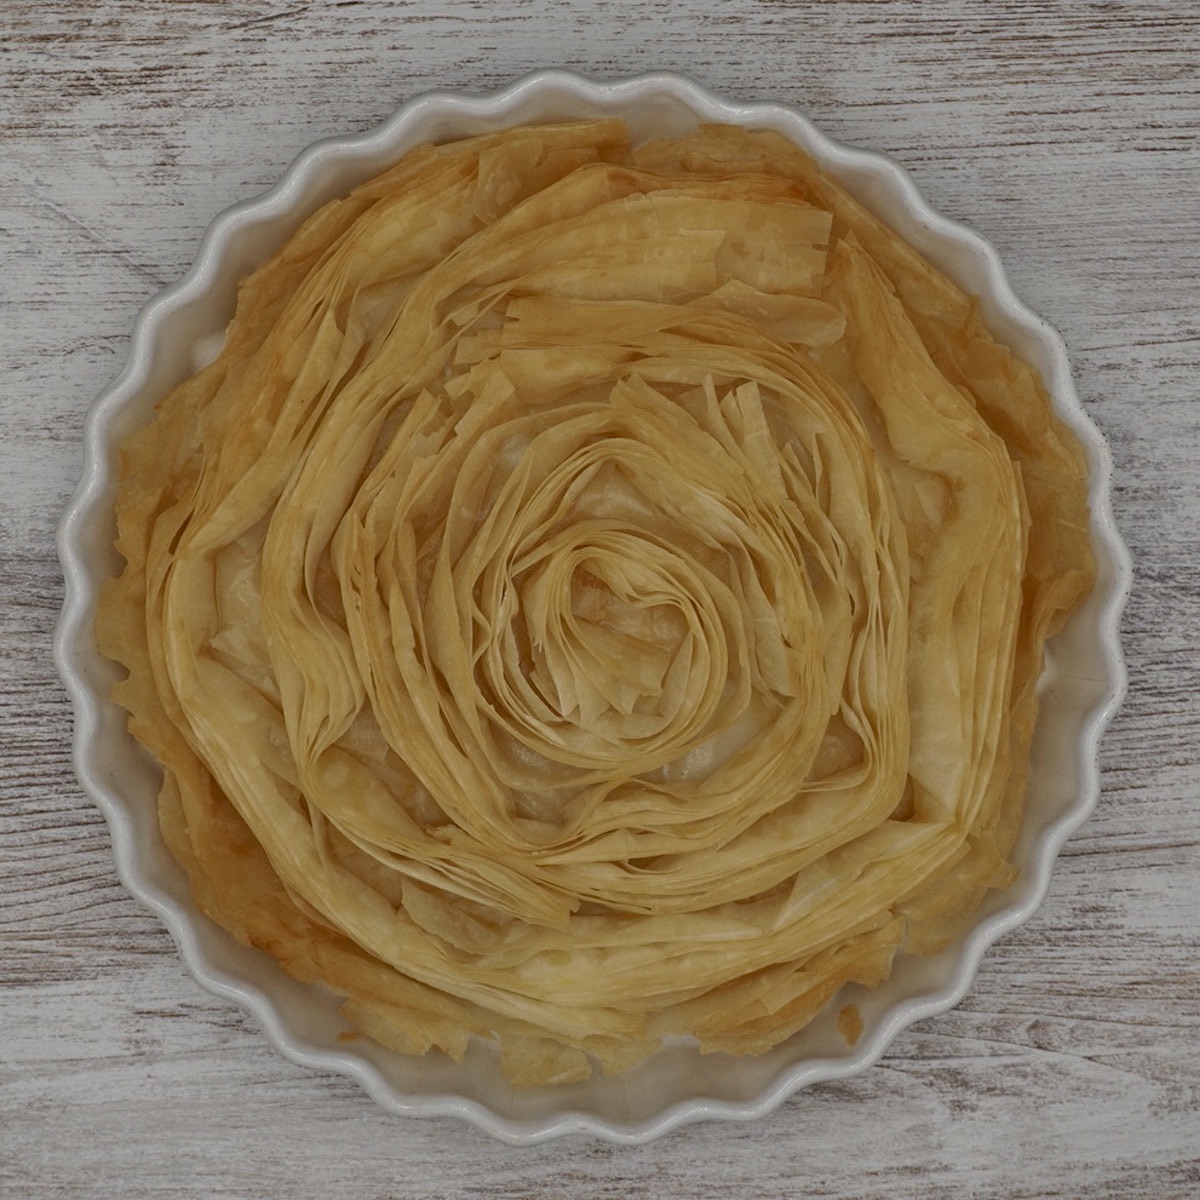 Filo pastry arranged in a circular dish.